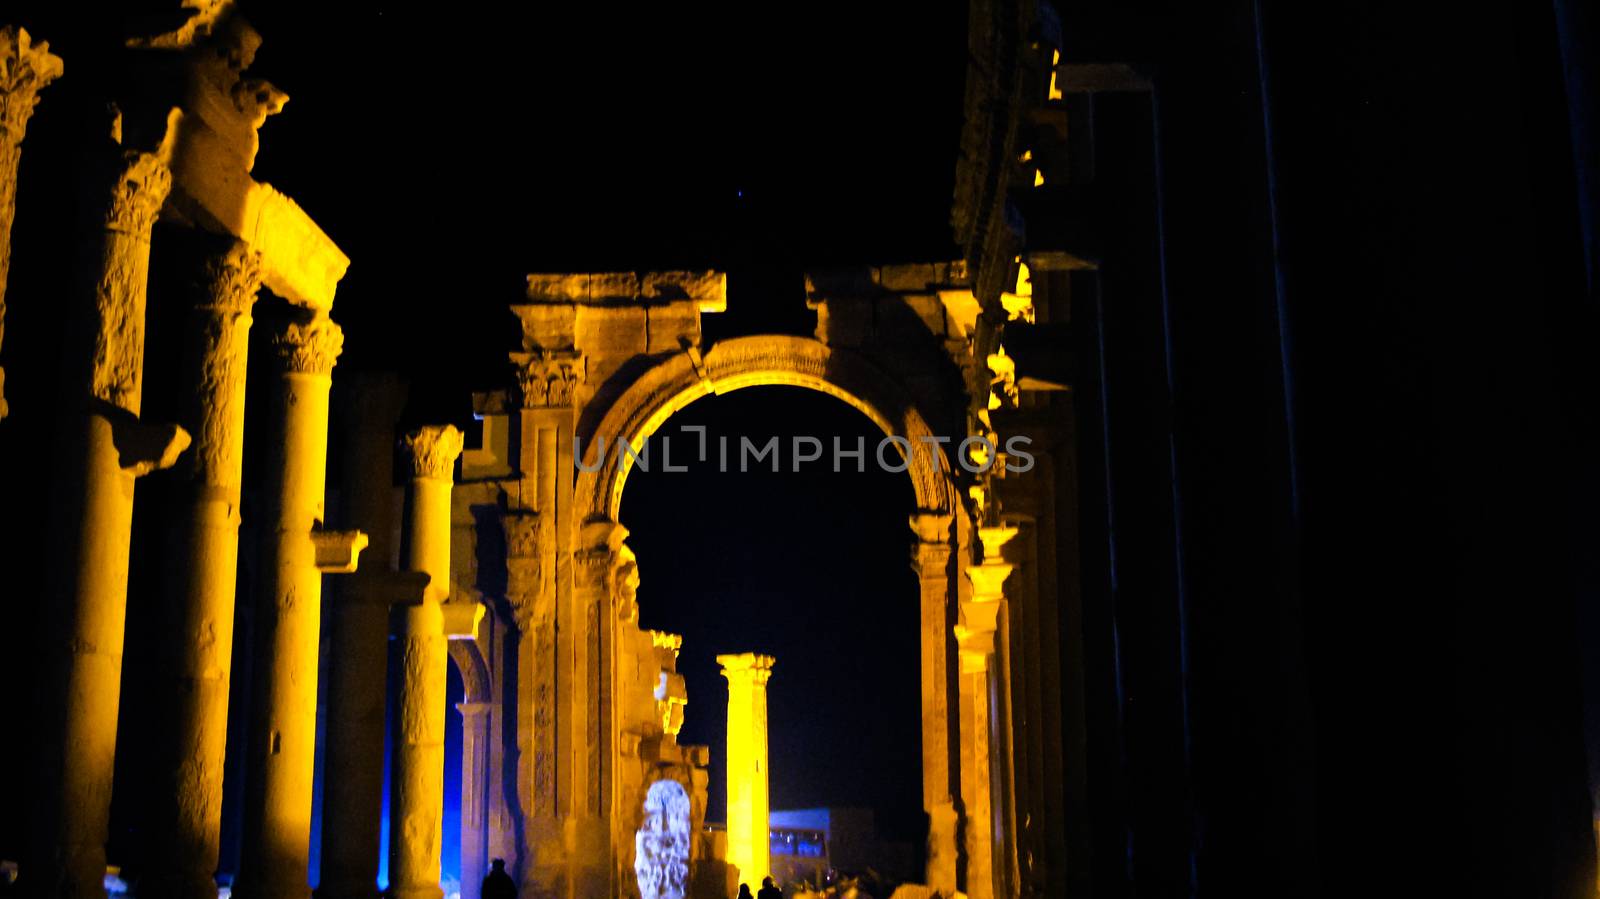 Palmyra columns in the night, destroyed by DAESH now, Syria